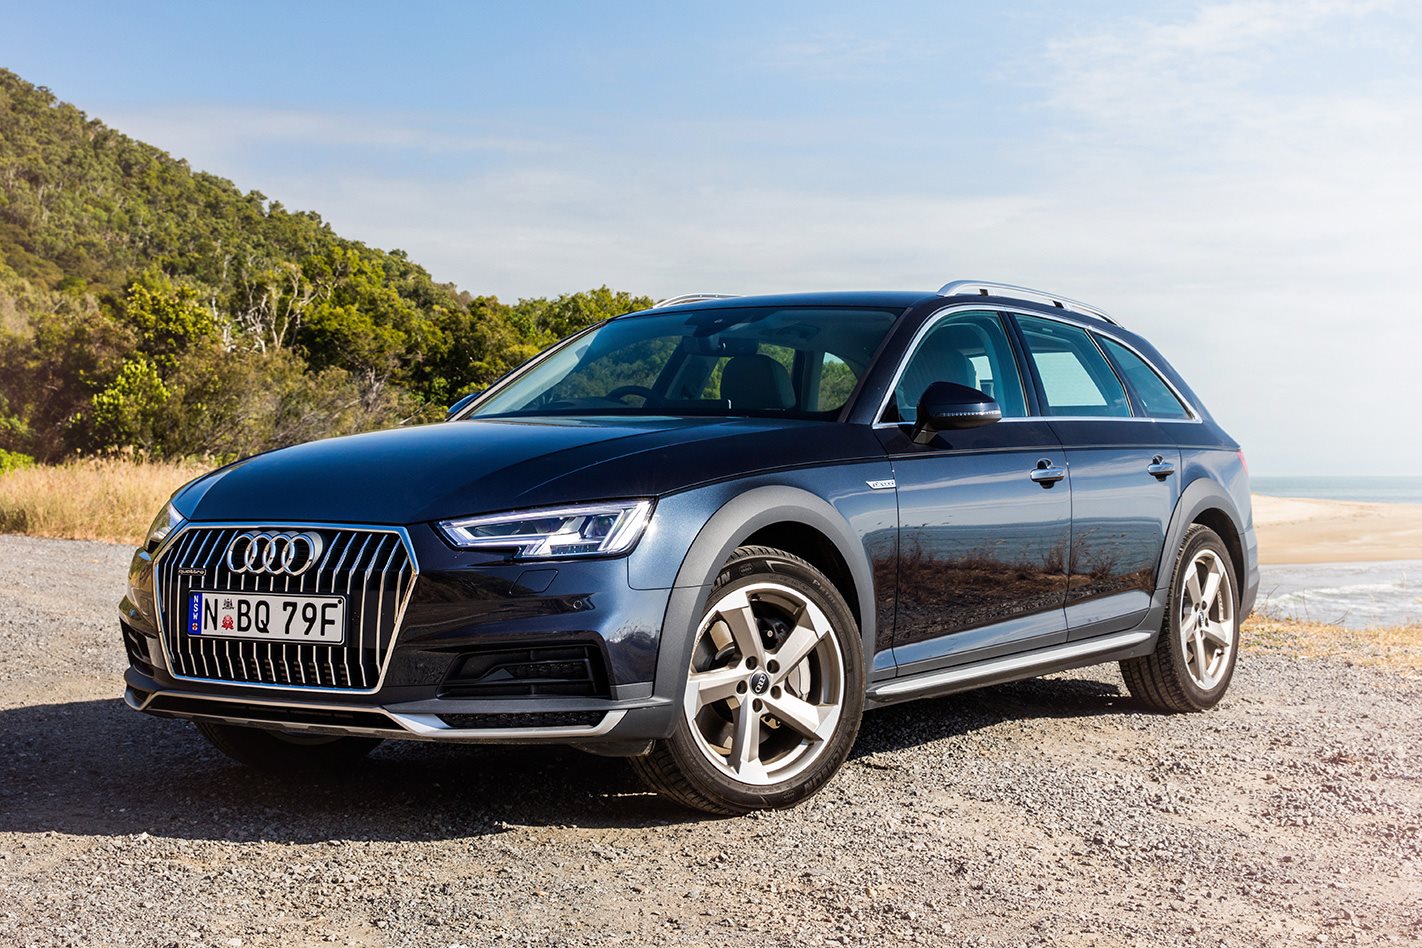 2016 Audi A4 Allroad quattro: 7 things you need to know